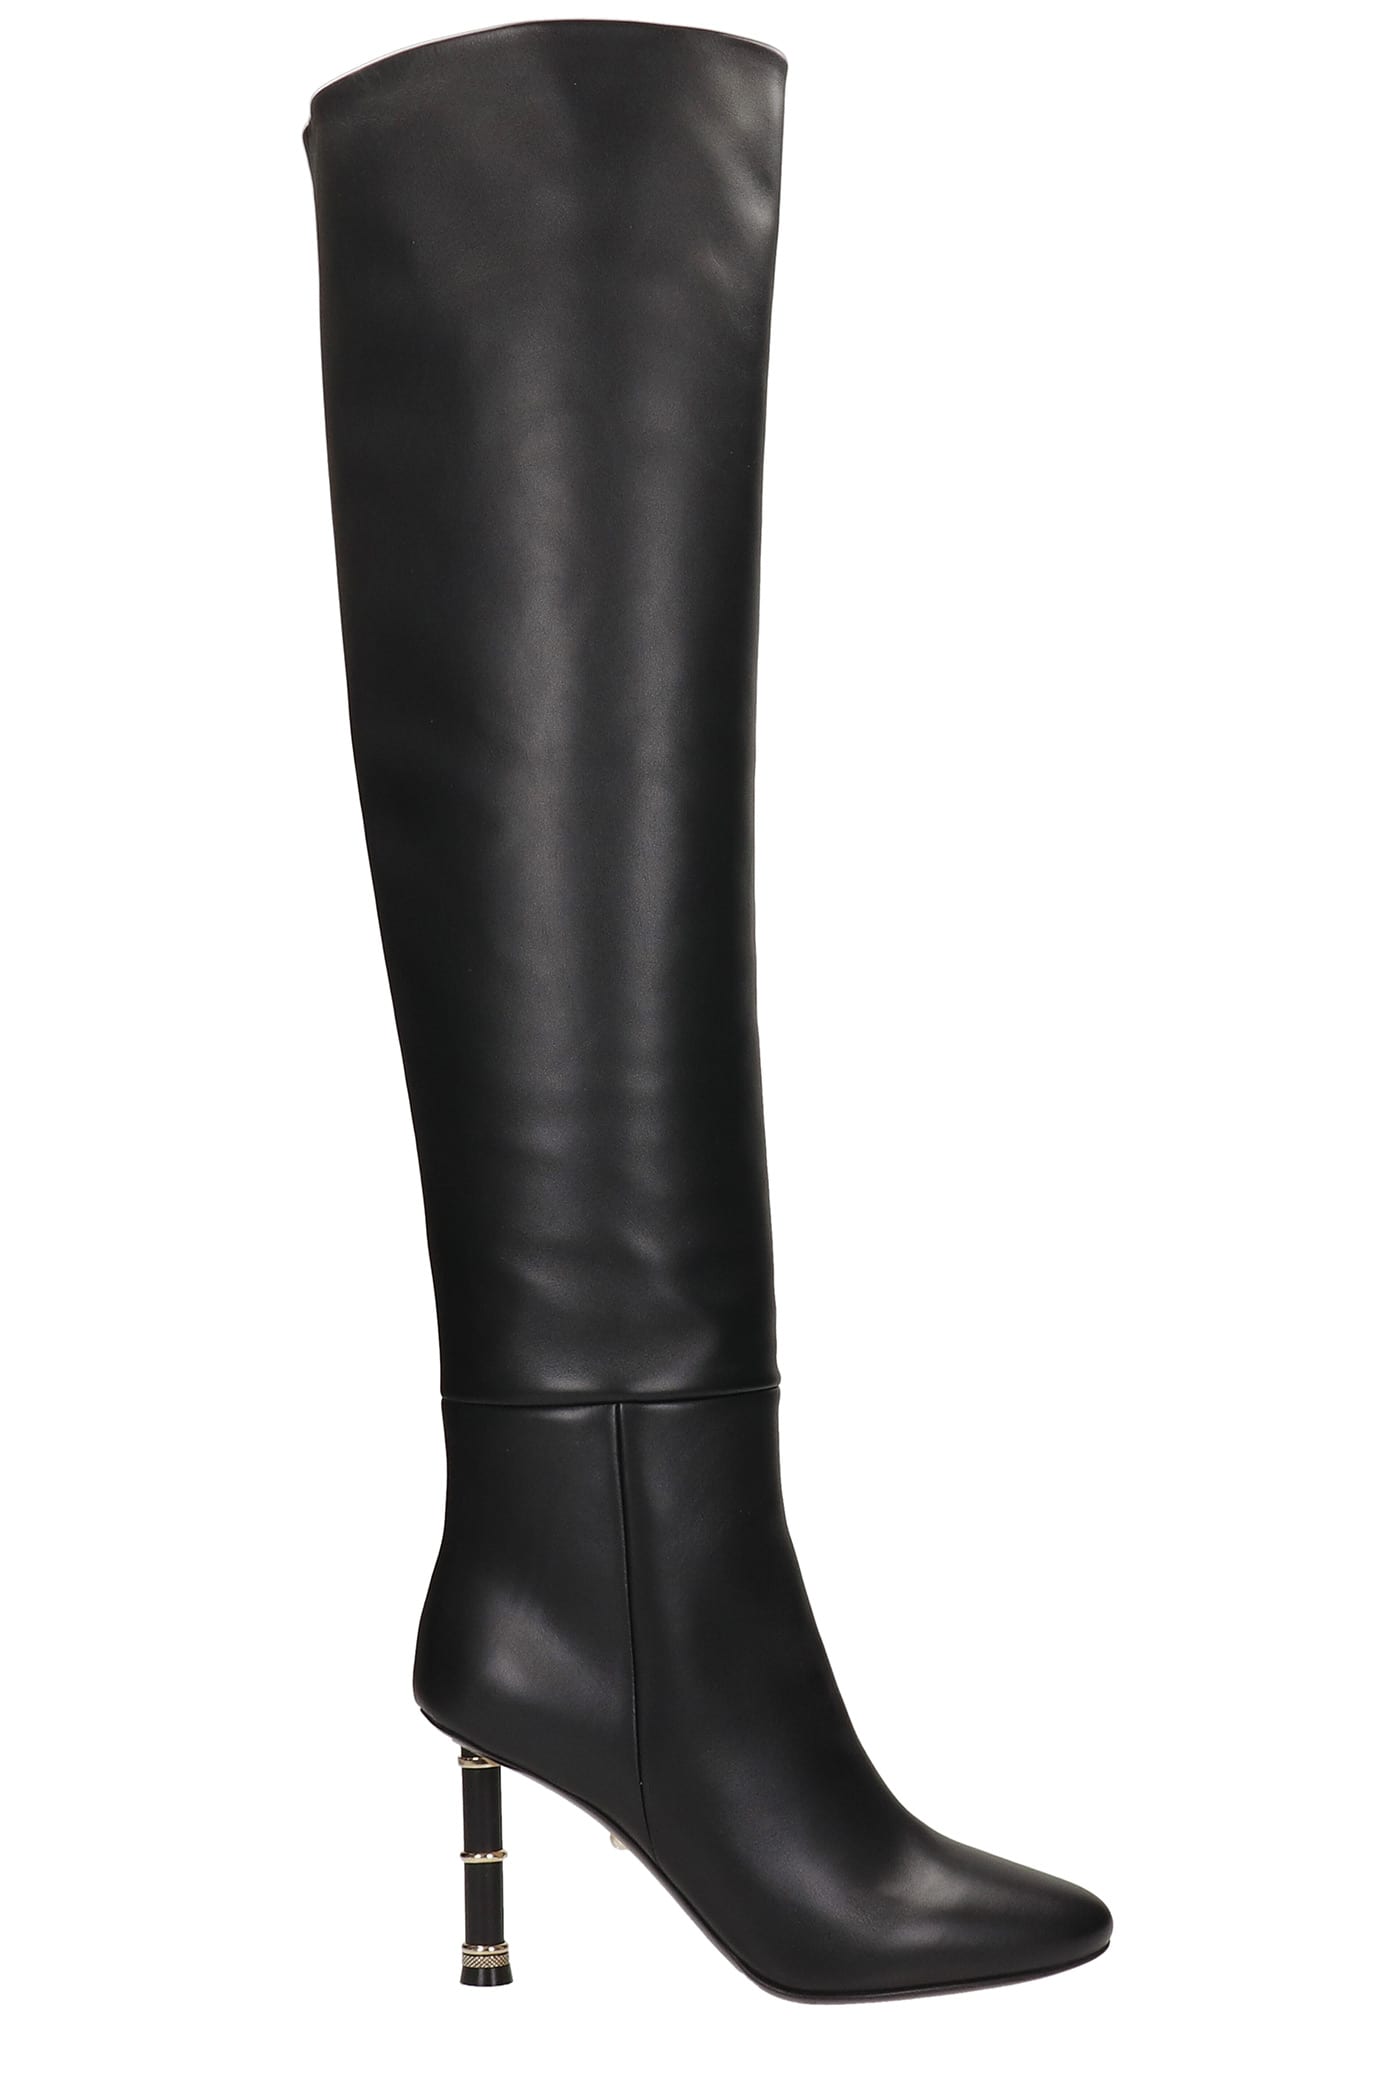 Alevì Nina 090 High Heels Boots In Black Leather